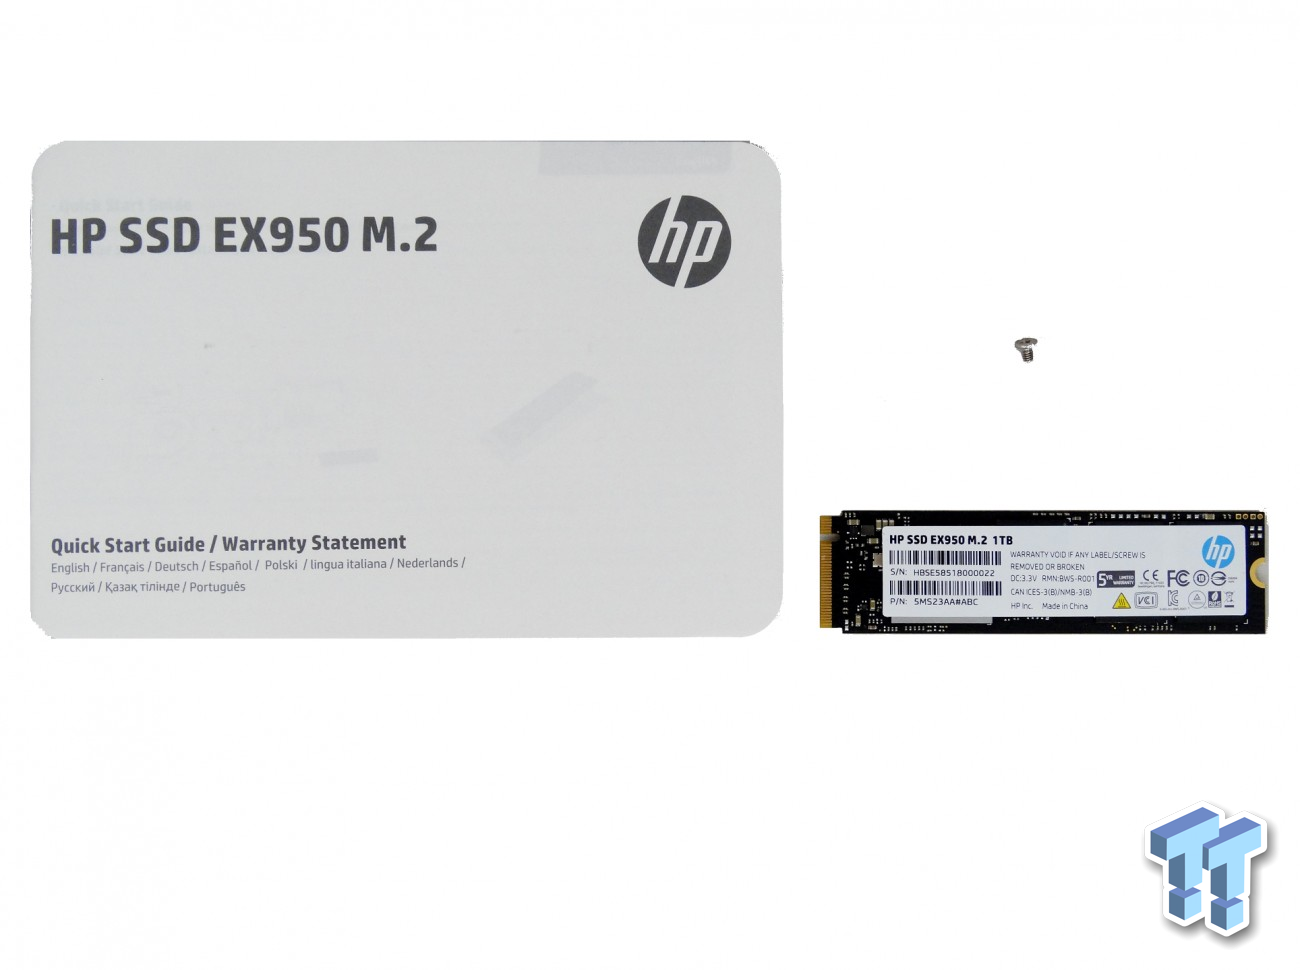 HP EX950 2TB SSD Review: Best 2TB NVMe SSD Available Today | TweakTown